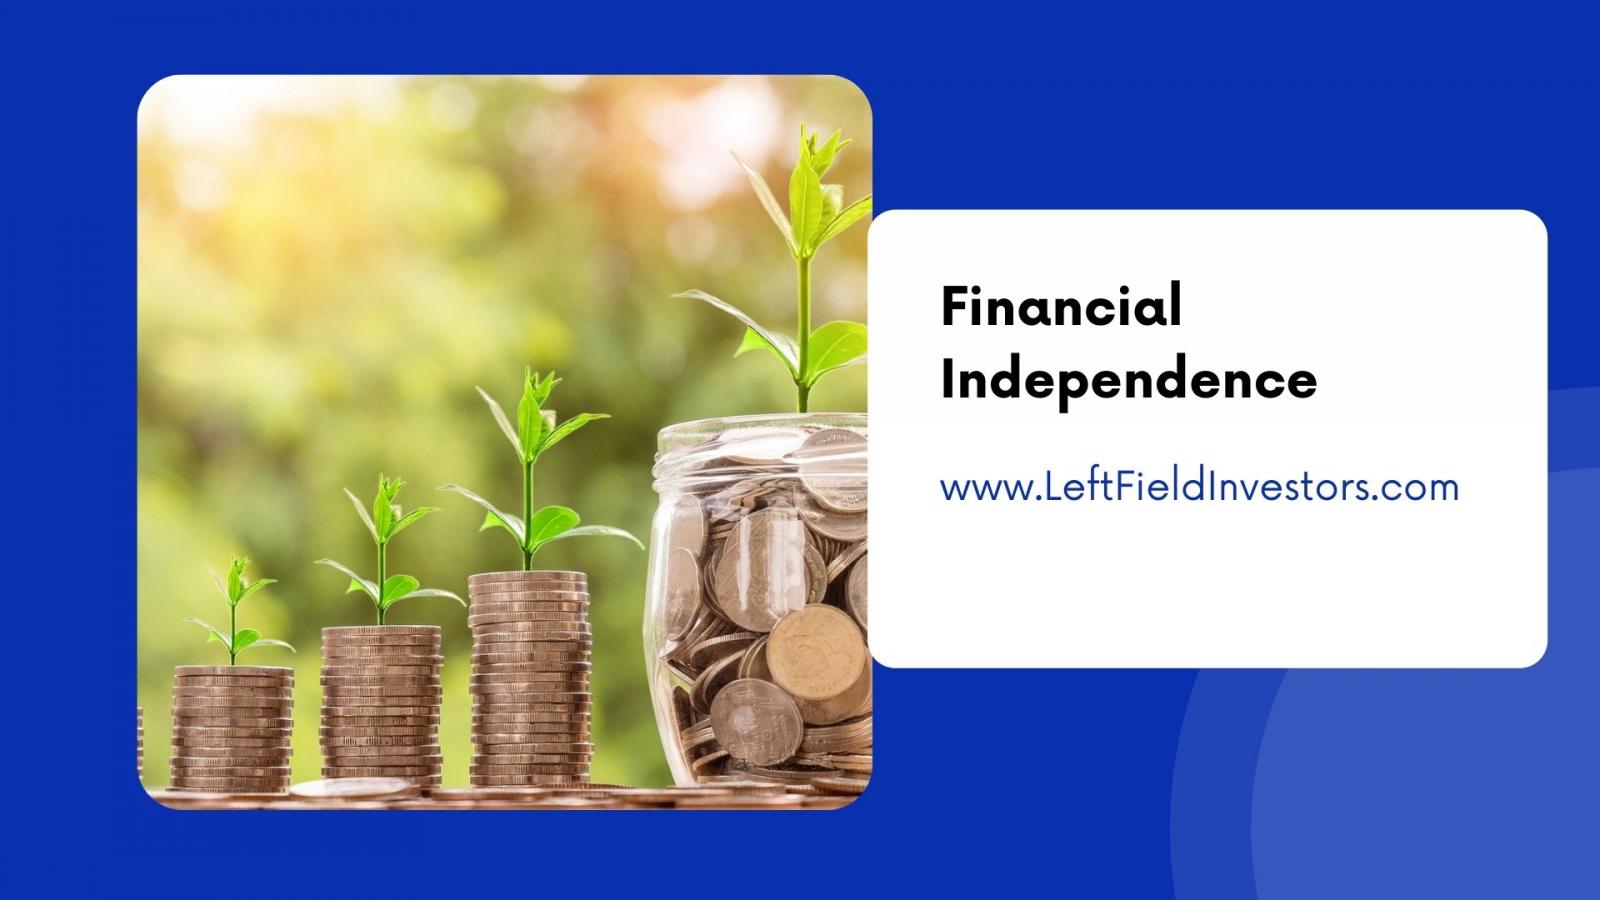  Financial Independence